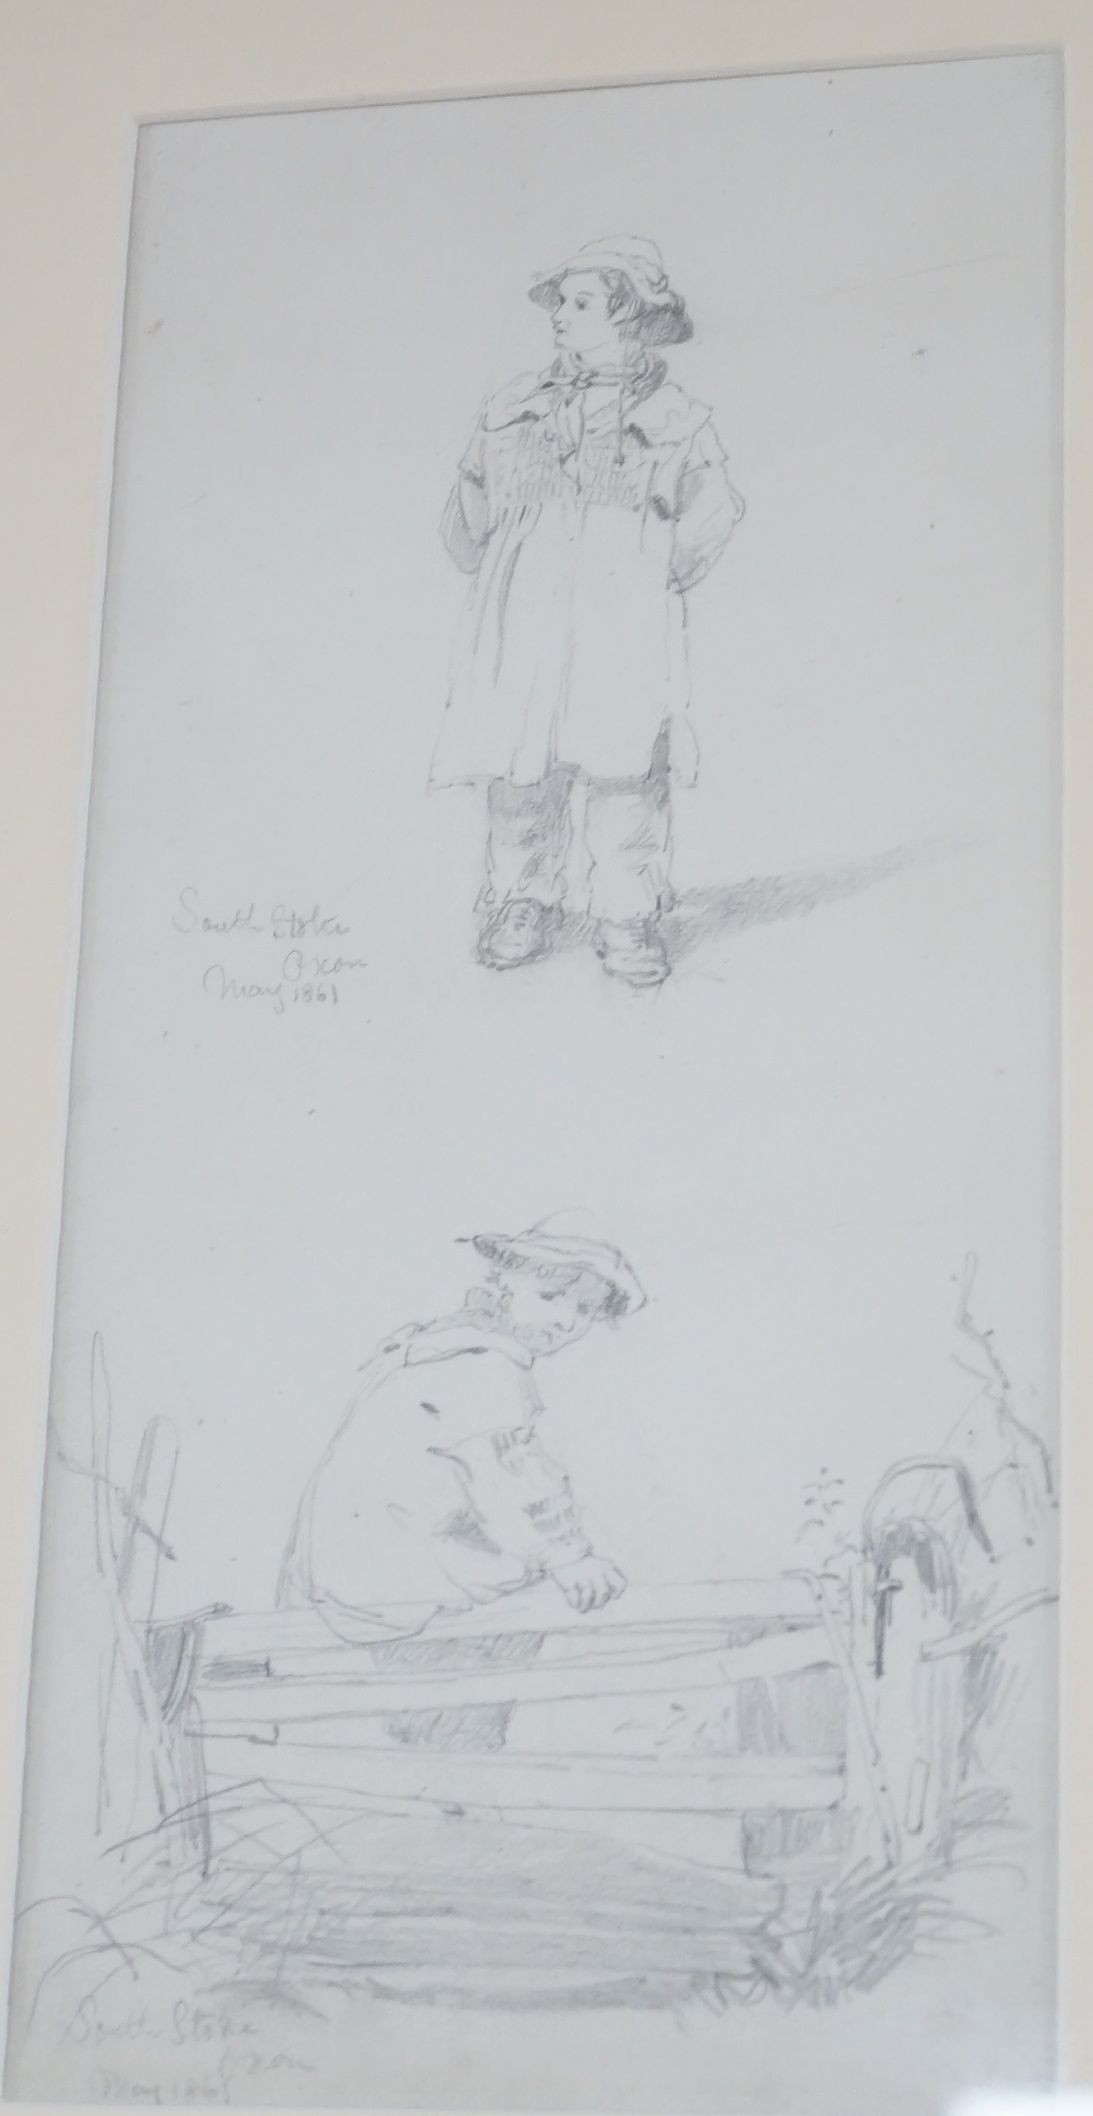 John Henry Mole (1814-1886), Child on a stile and study of another child, inscribed ‘South Stoke, Oxon 1861', 25 x 12cm